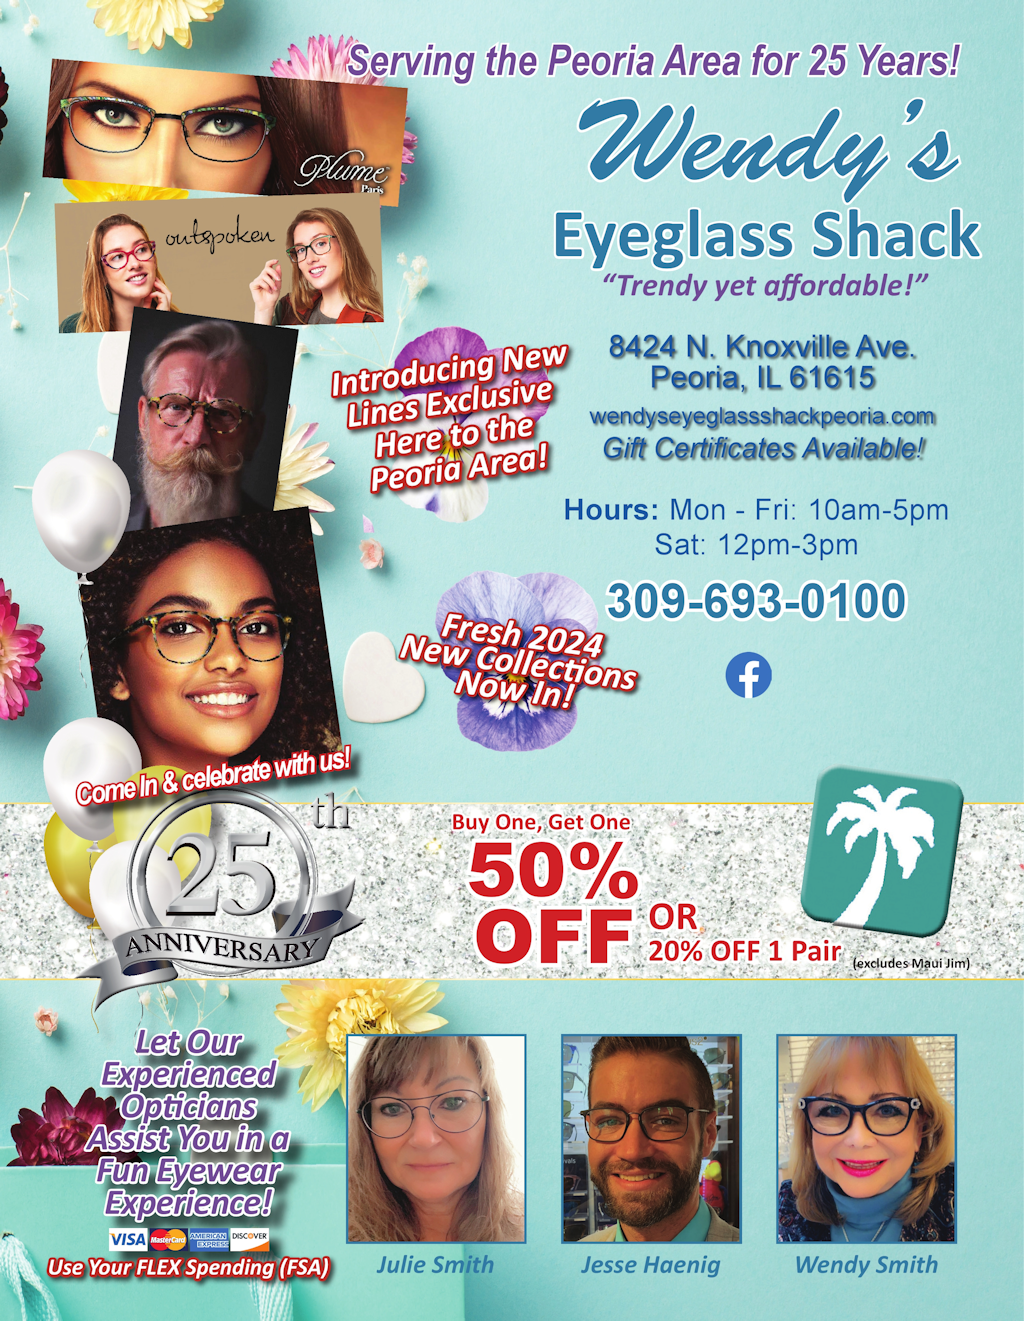 Wendy's Eyeglass Shack eye glasses, sunglasses, repairs, adjustments 20% off coupon and free gift wrap. Peoria, IL